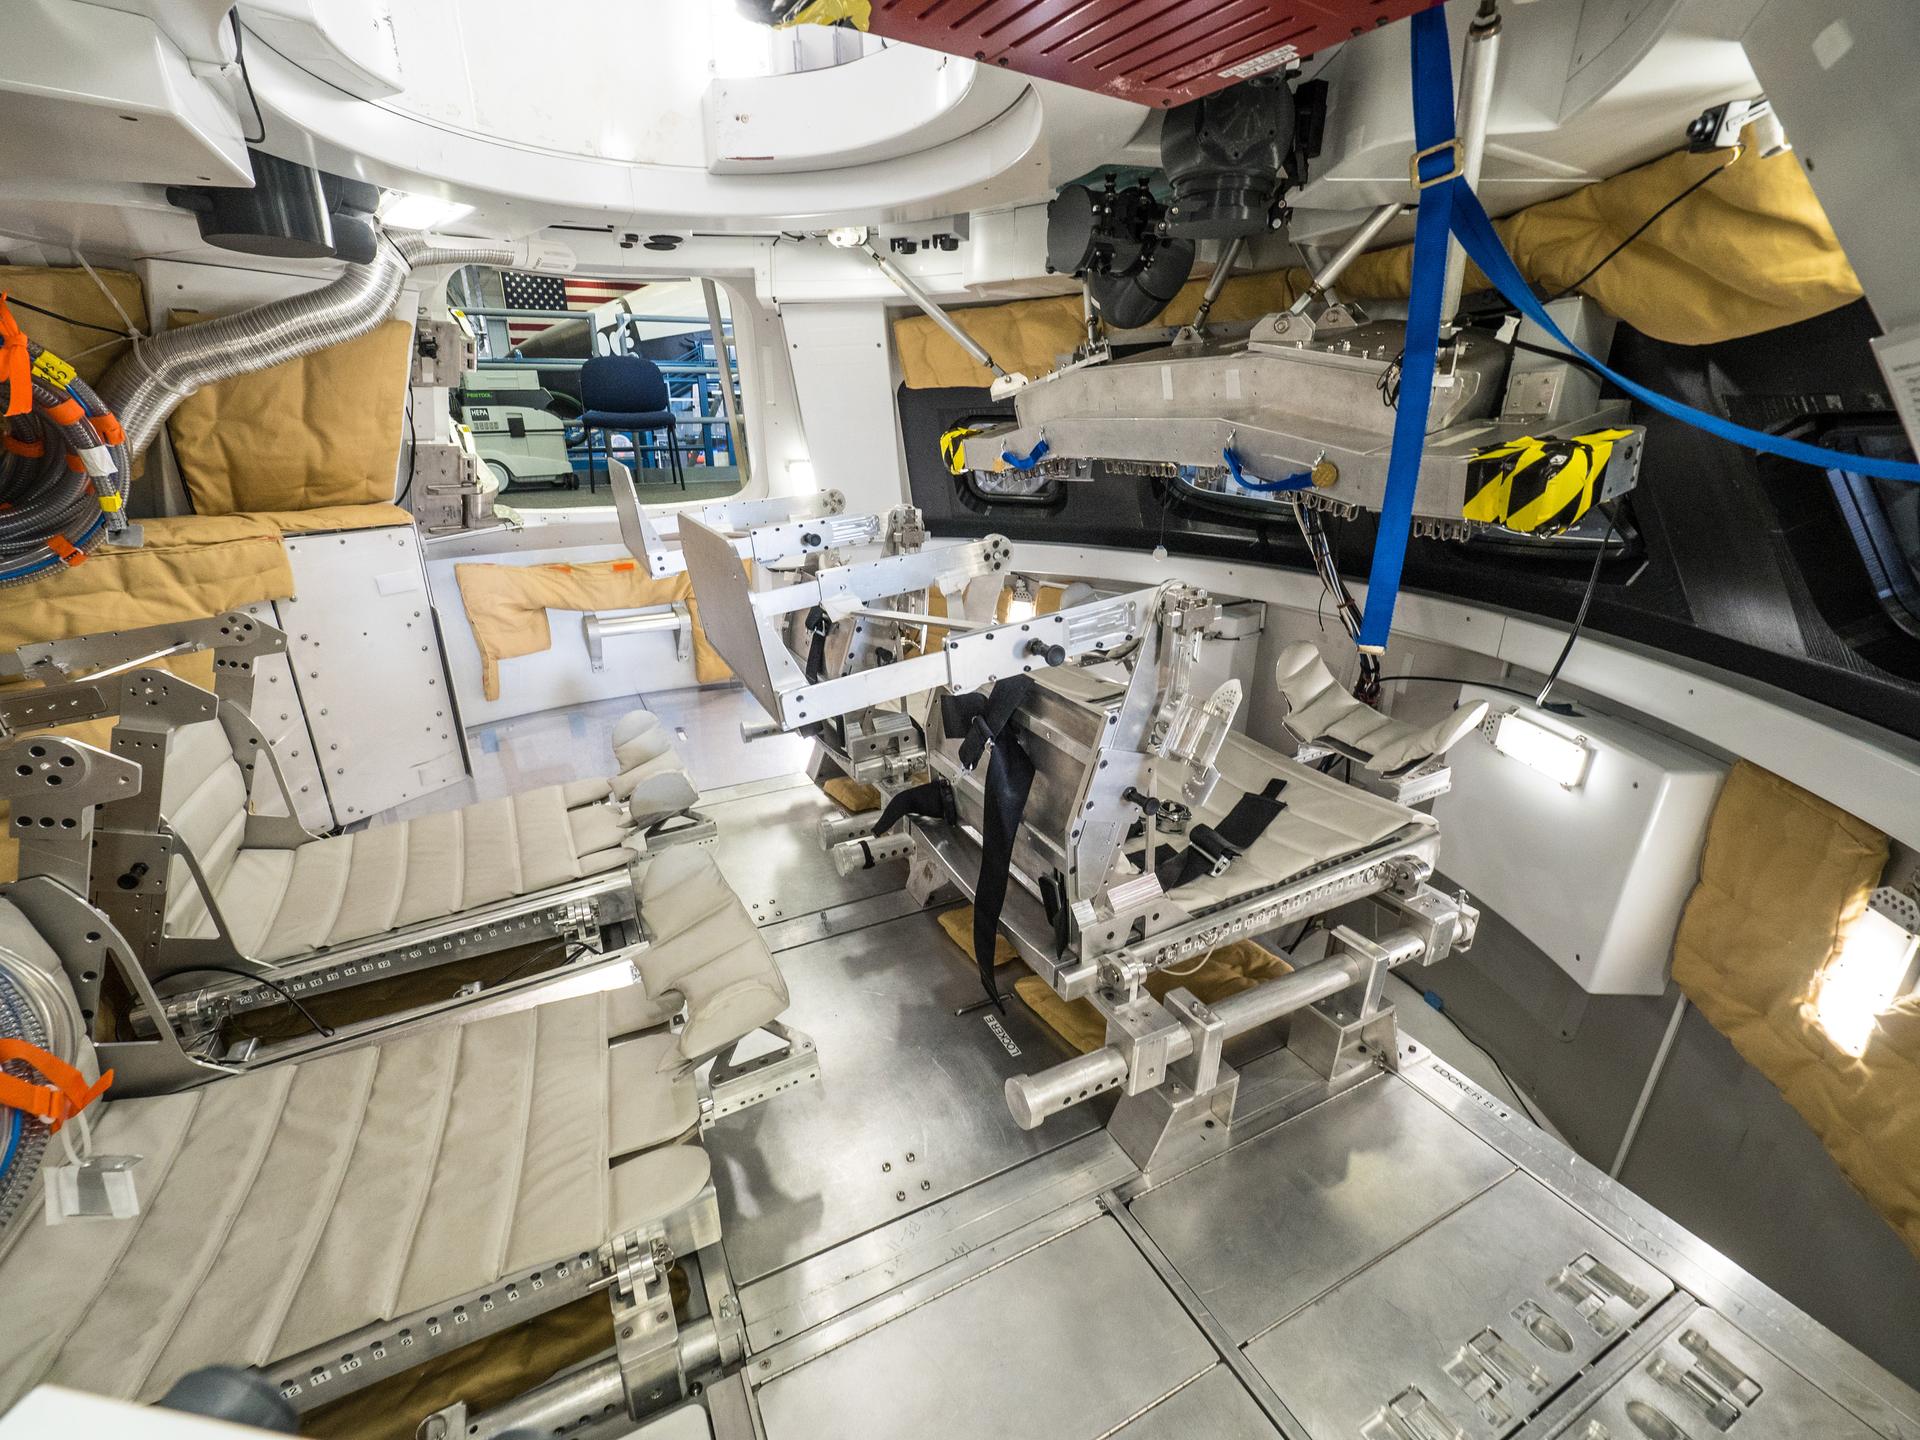 The interior of a four-seater narrow-cone spaceship